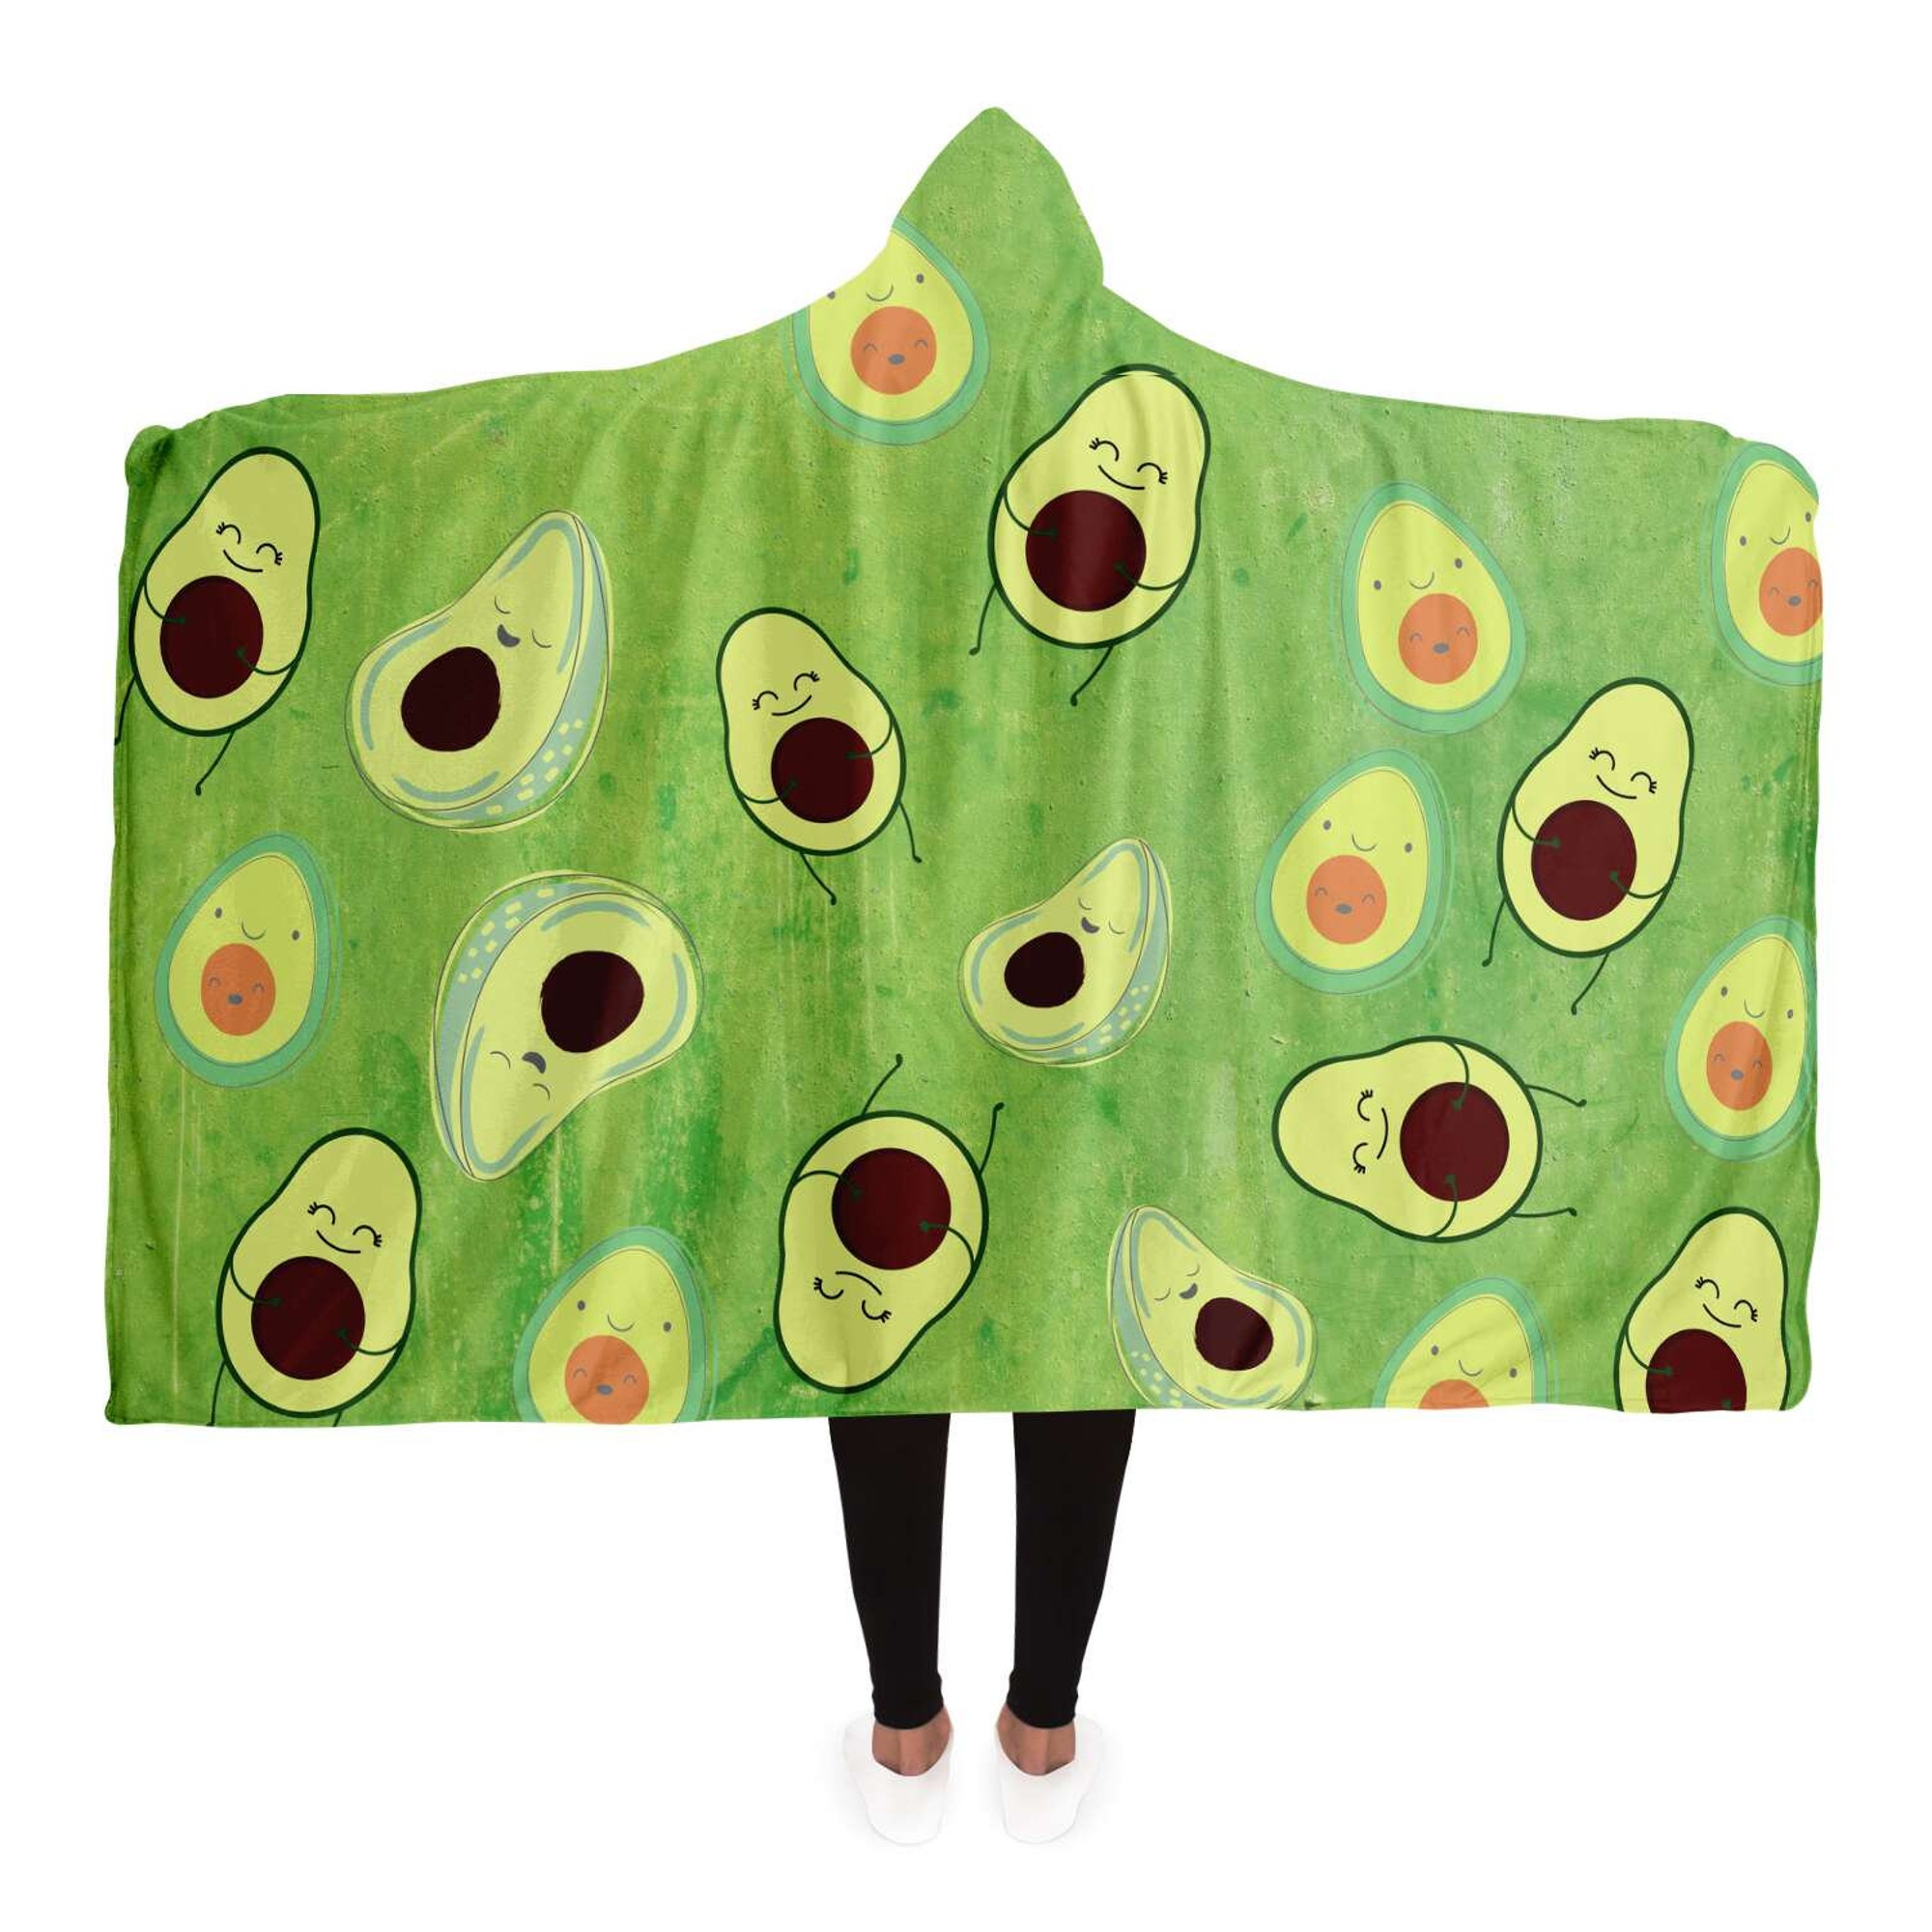 Matching Avocados Hooded Blanket